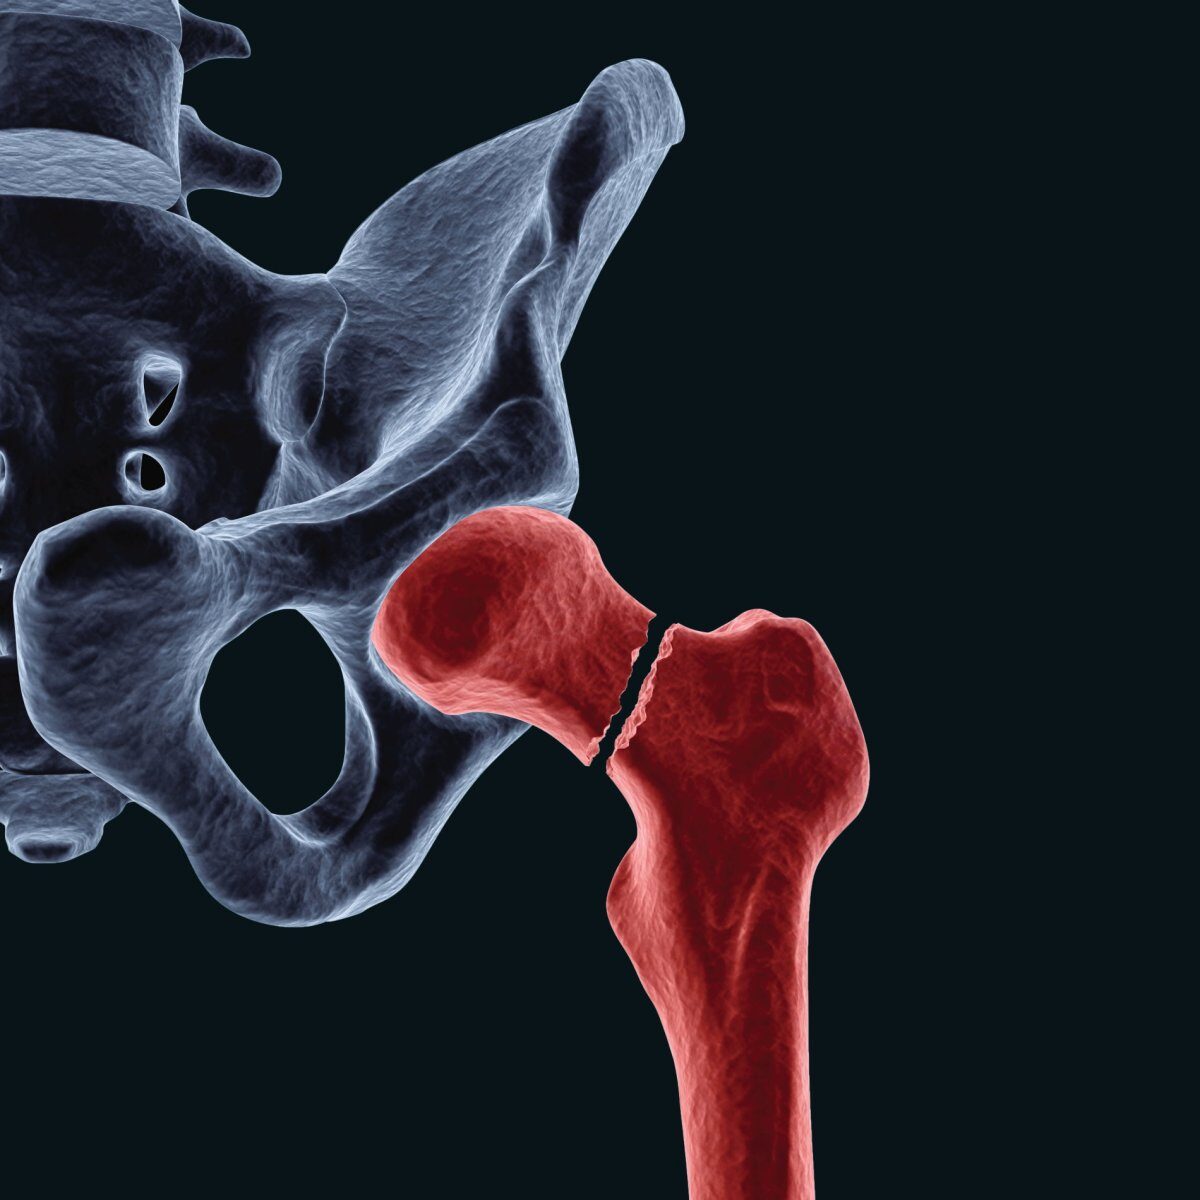 Digital medical illustration depicting a hip fracture often seen in cases of osteoporosis; intracapsular (femoral neck) fracture: a fracture of the neck of the femur.